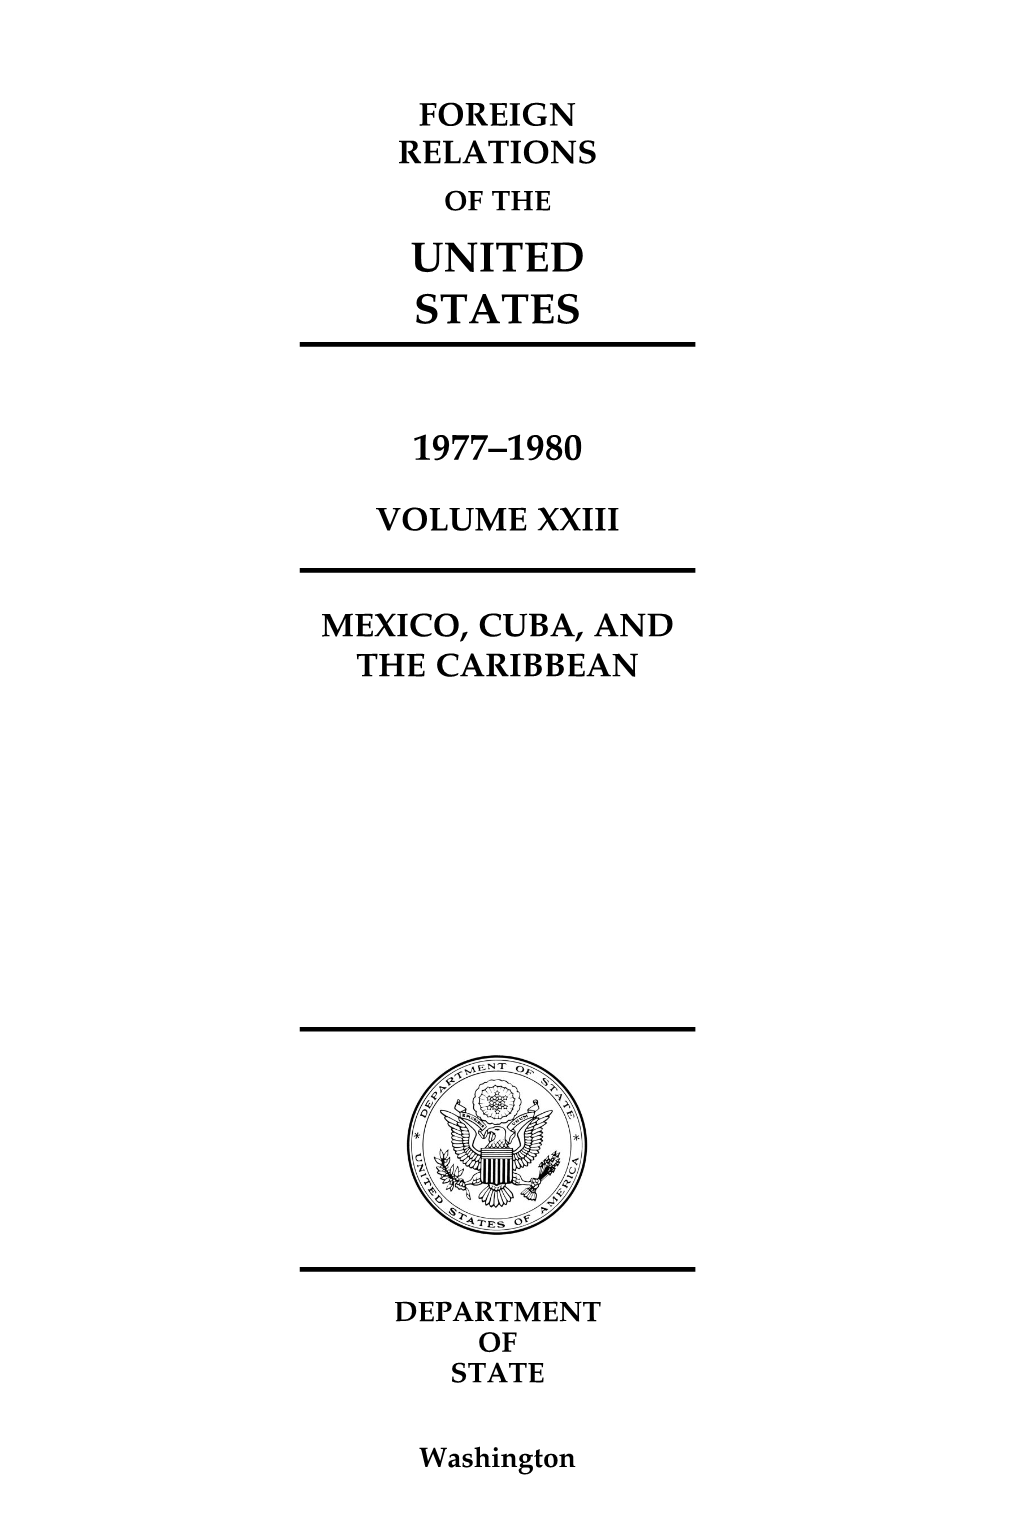 Foreign Relations of the United States: 1977-1980